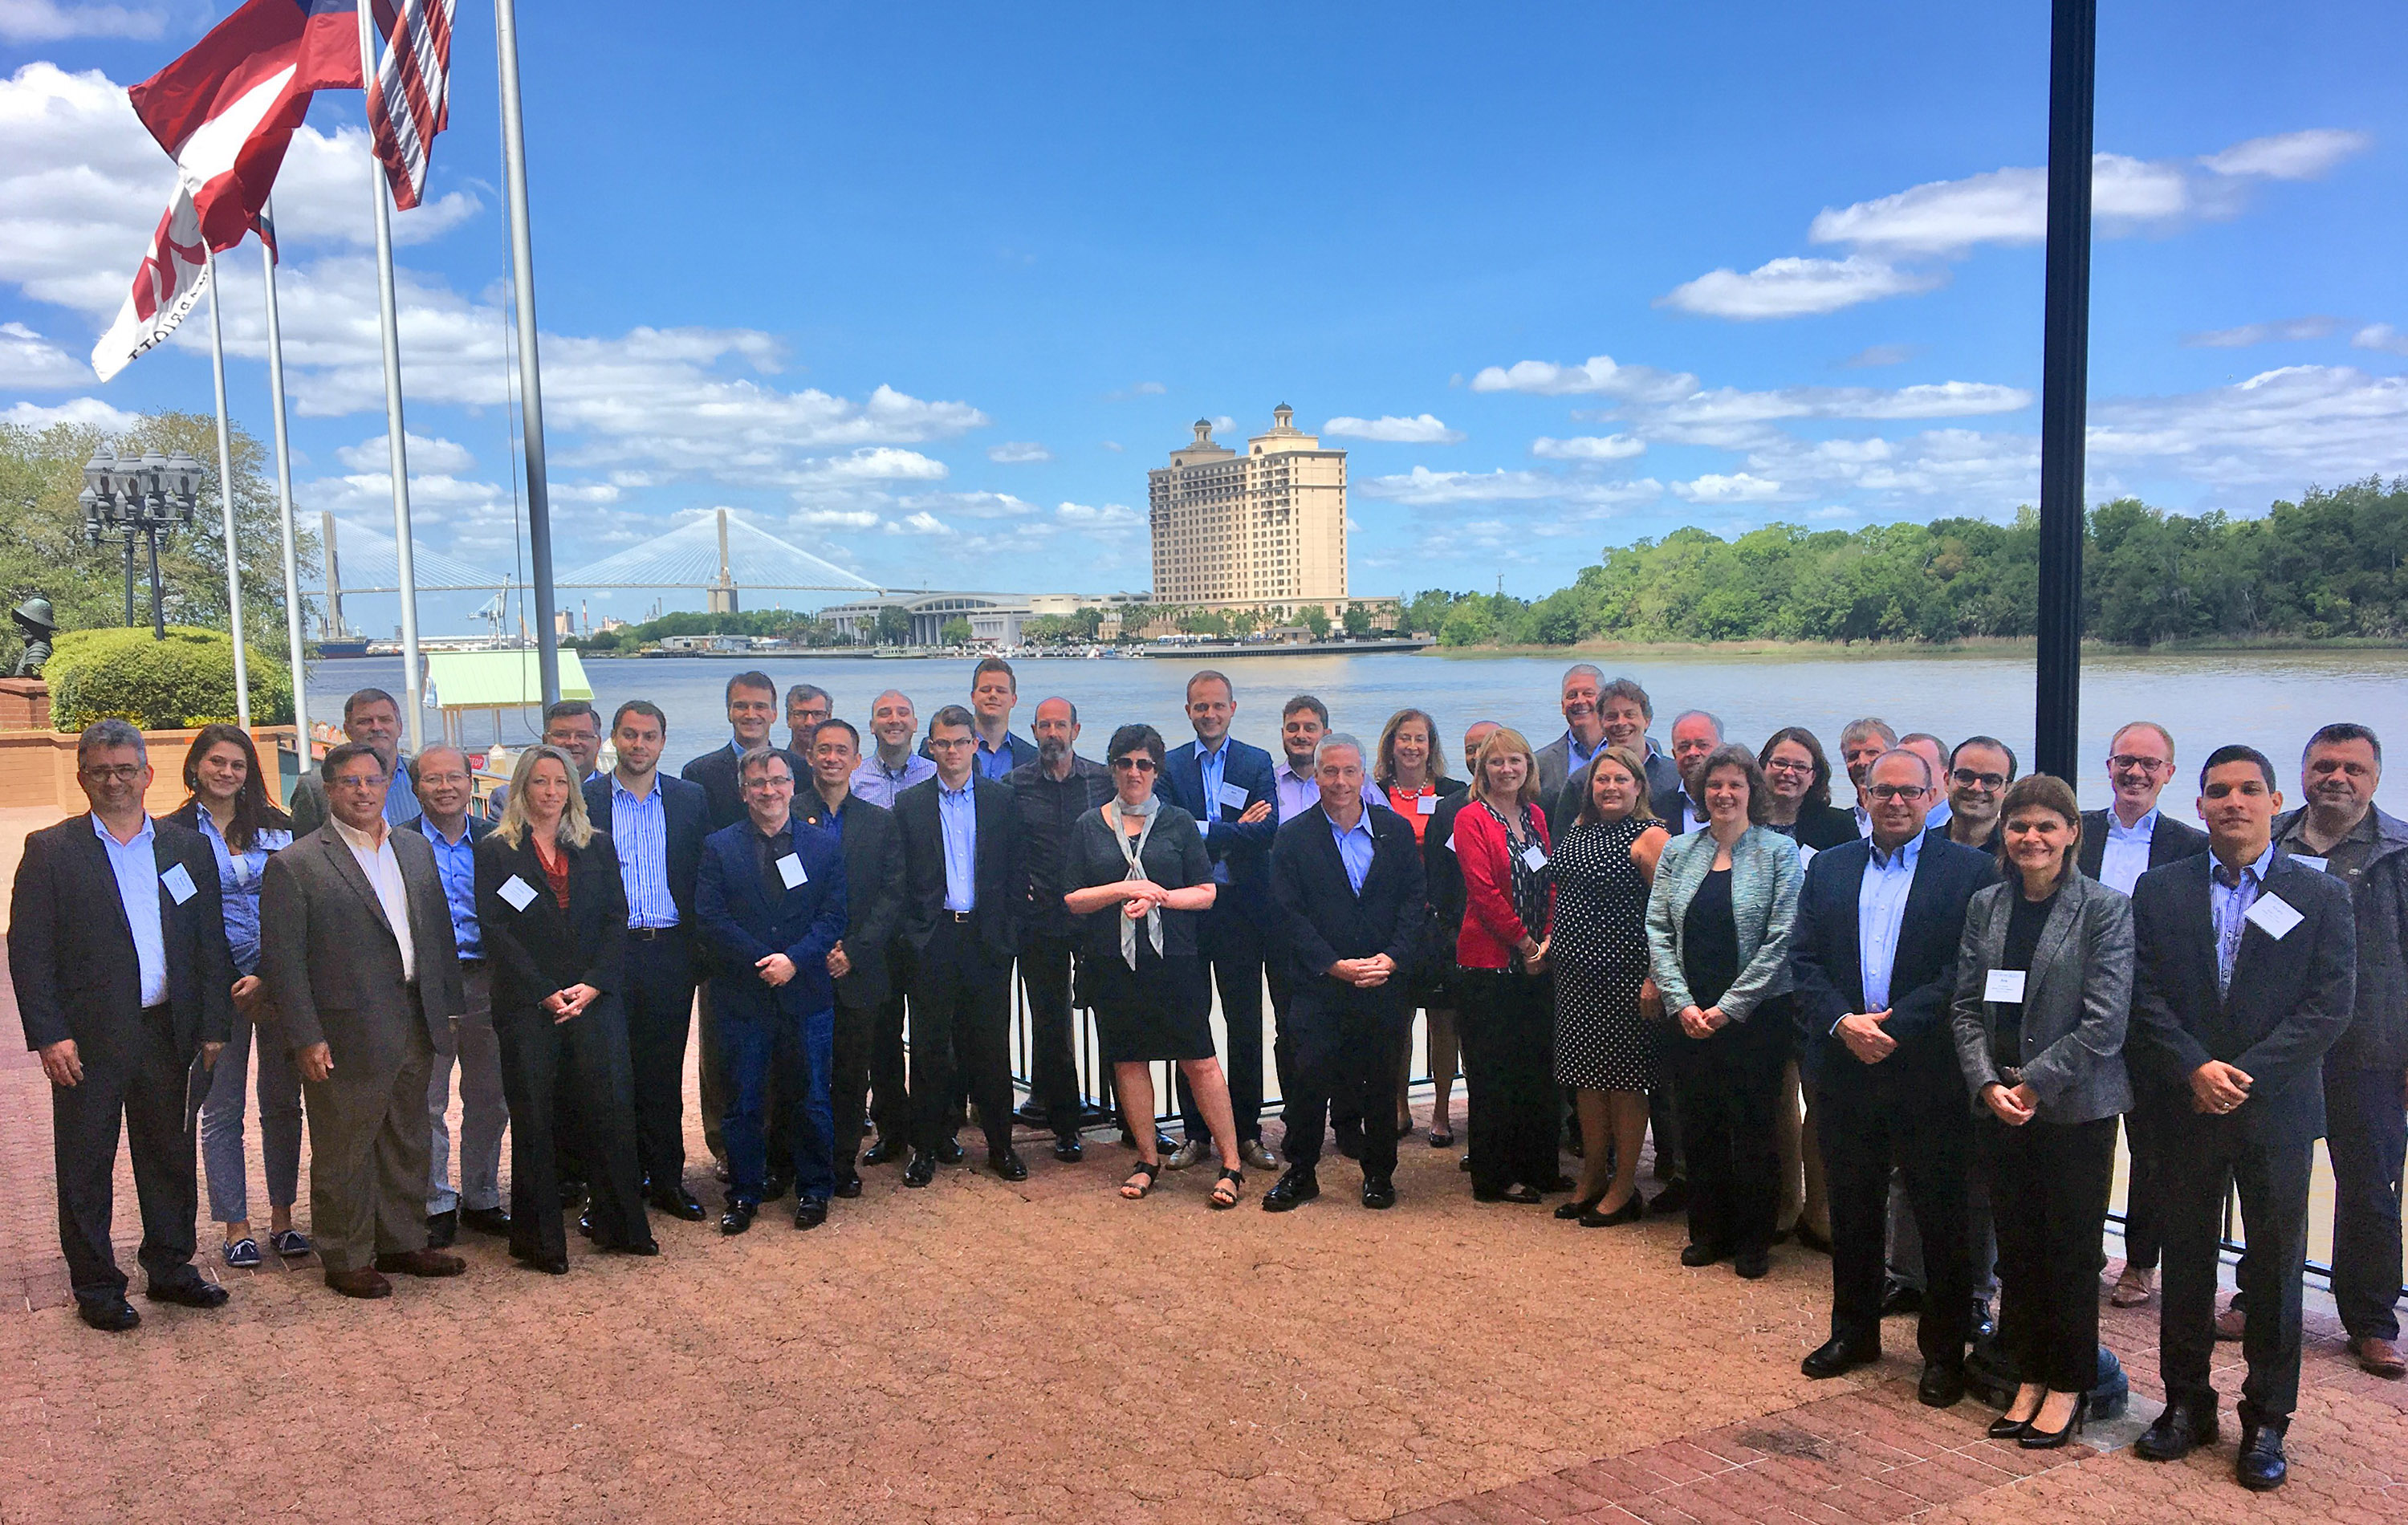 More than 50 professionals from industry, government and academia participated in the first ever Georgia Tech-sponsored ports logistics conference April 10-11 in Savannah.